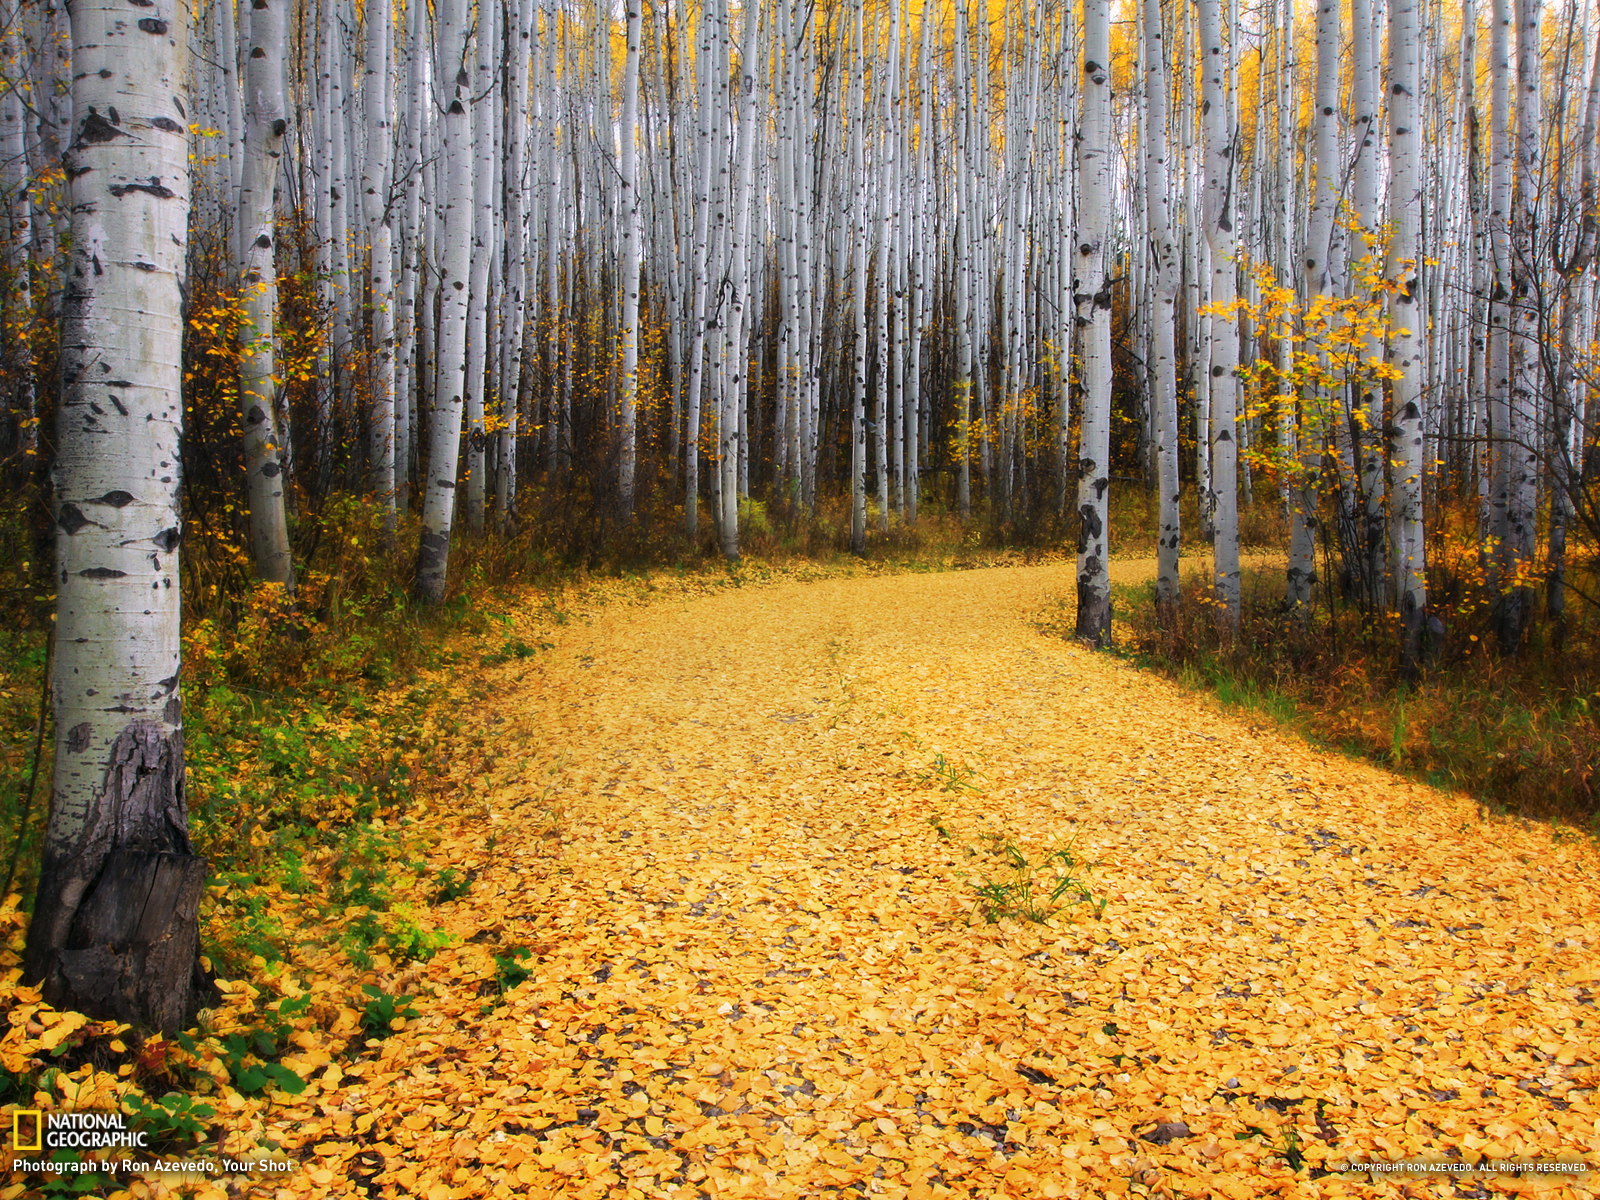 Forest Picture Tree Wallpaper National Geographic Photo Of The